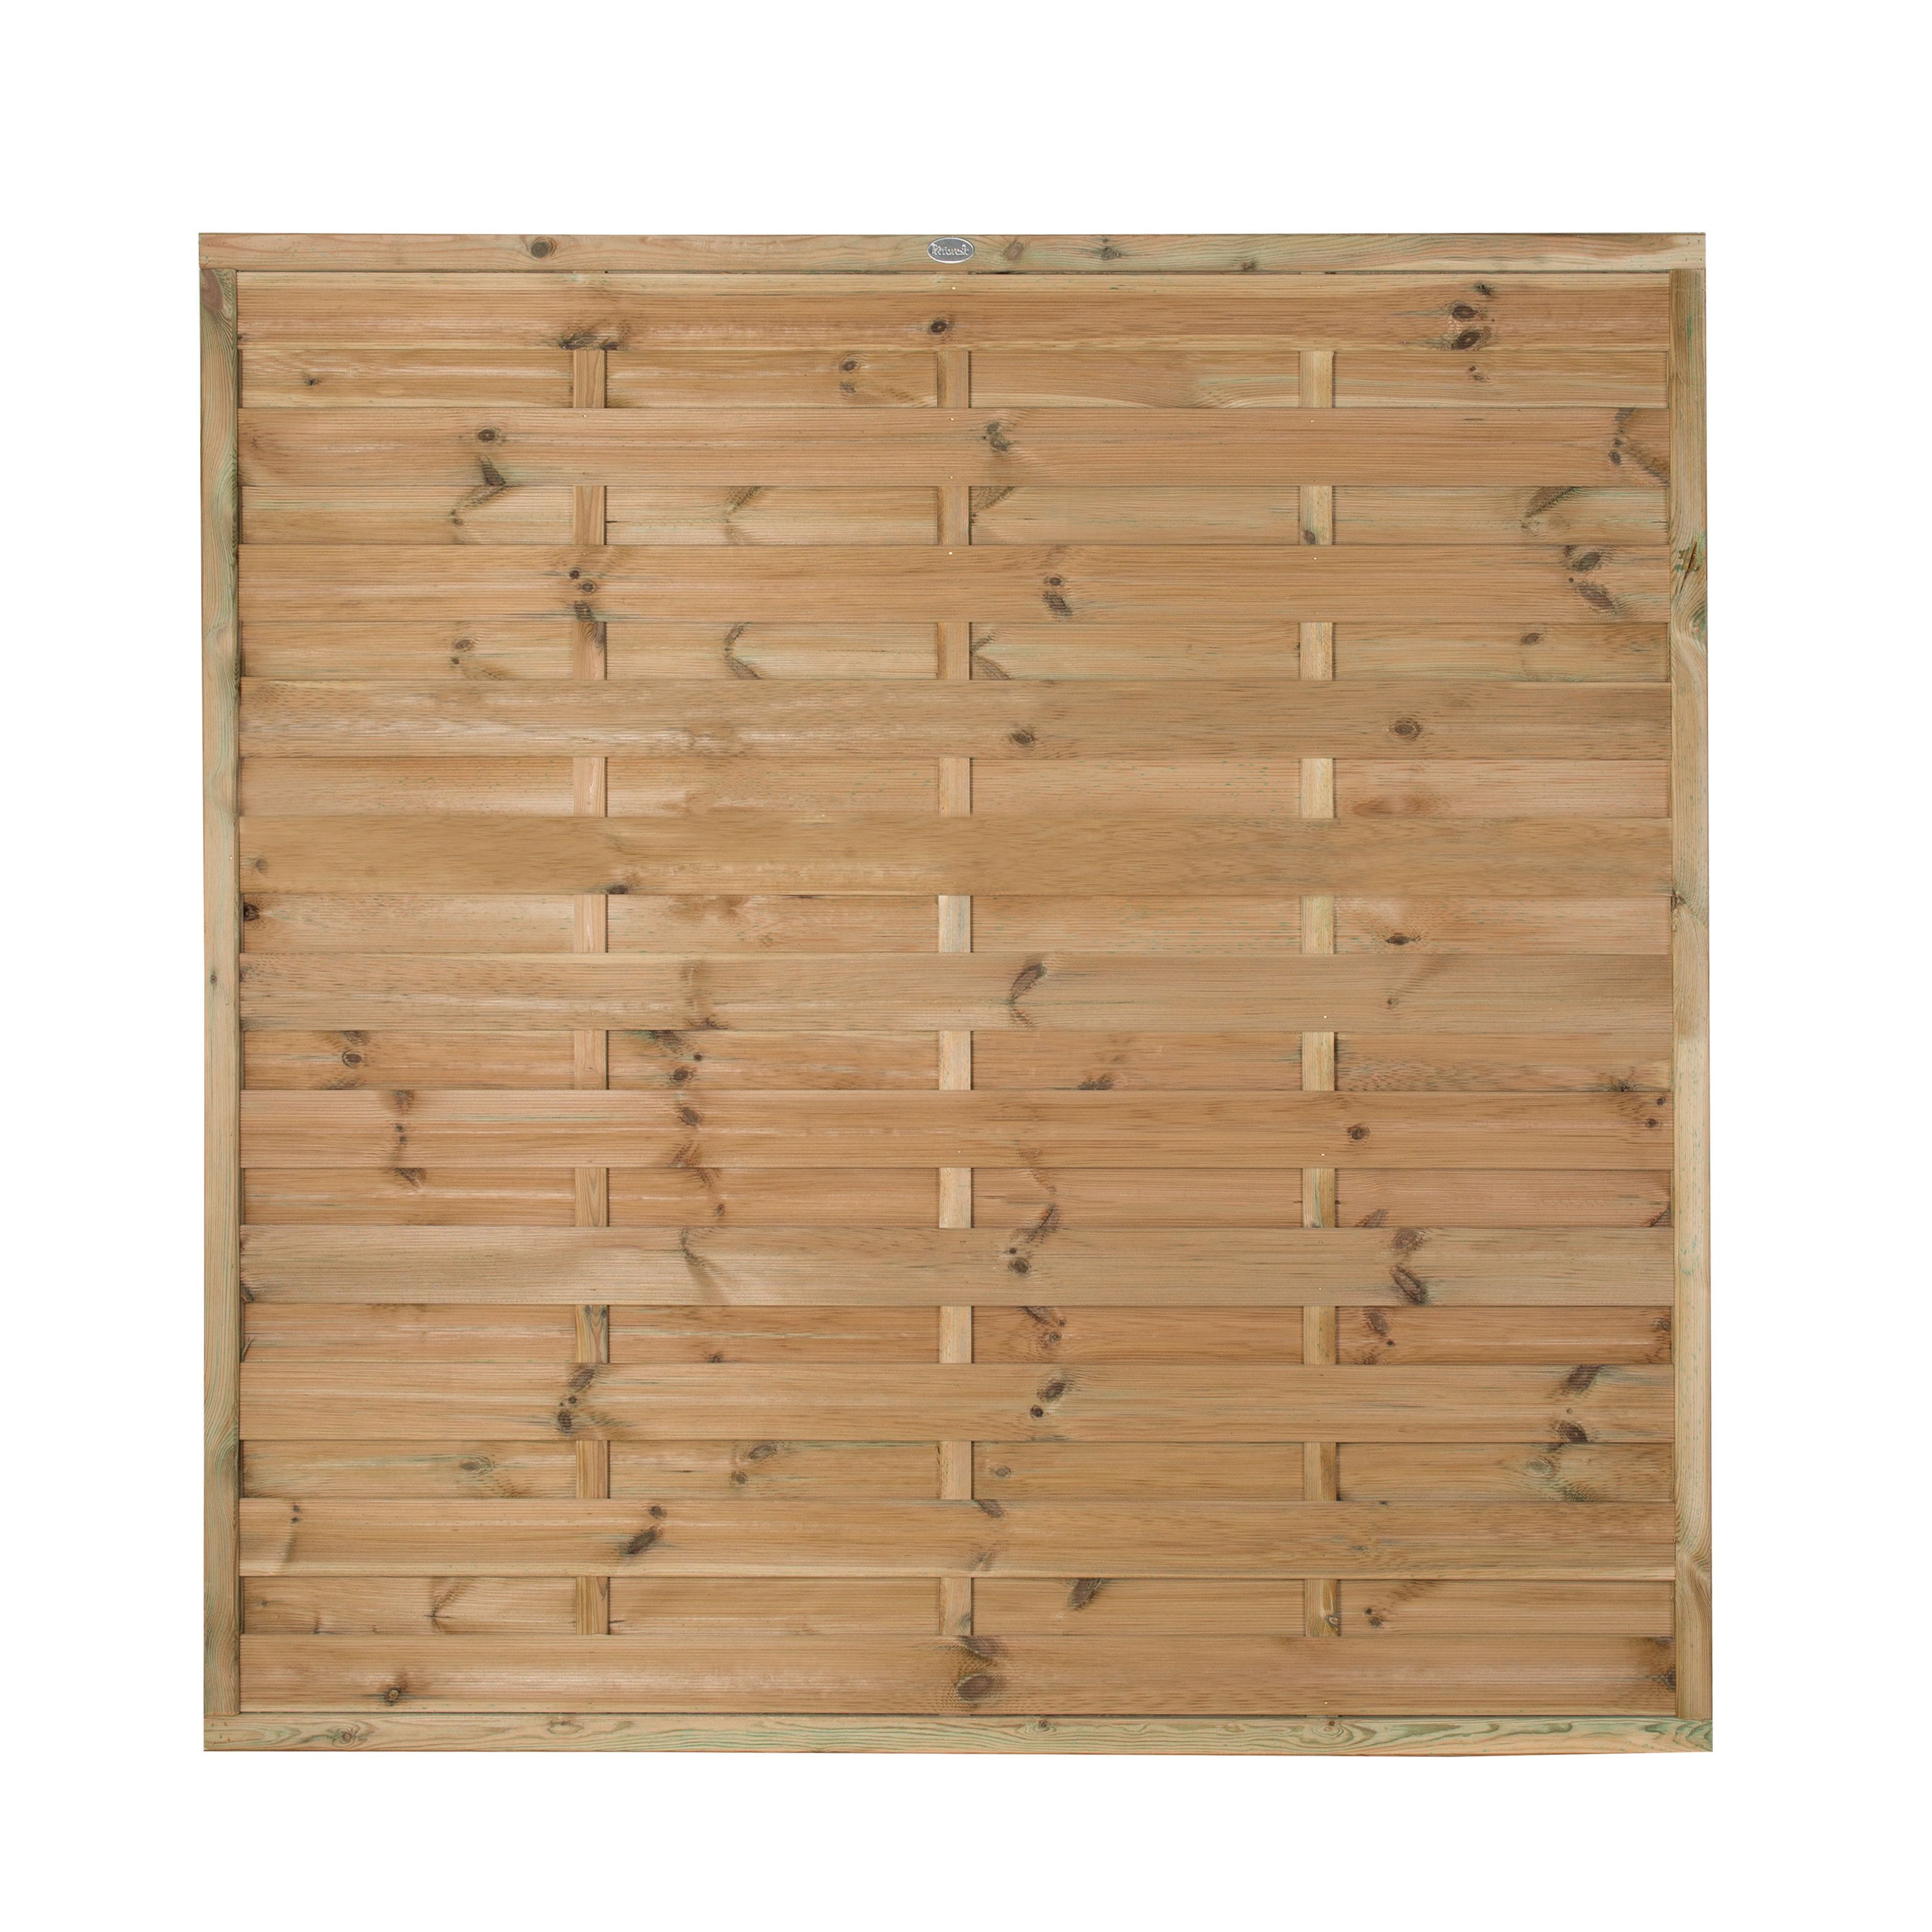 Image of Forest Garden Pressure Treated Horizontal Hit & Miss Fence Panel - 1800 x 1800mm - 6 x 6ft - Pack of 4